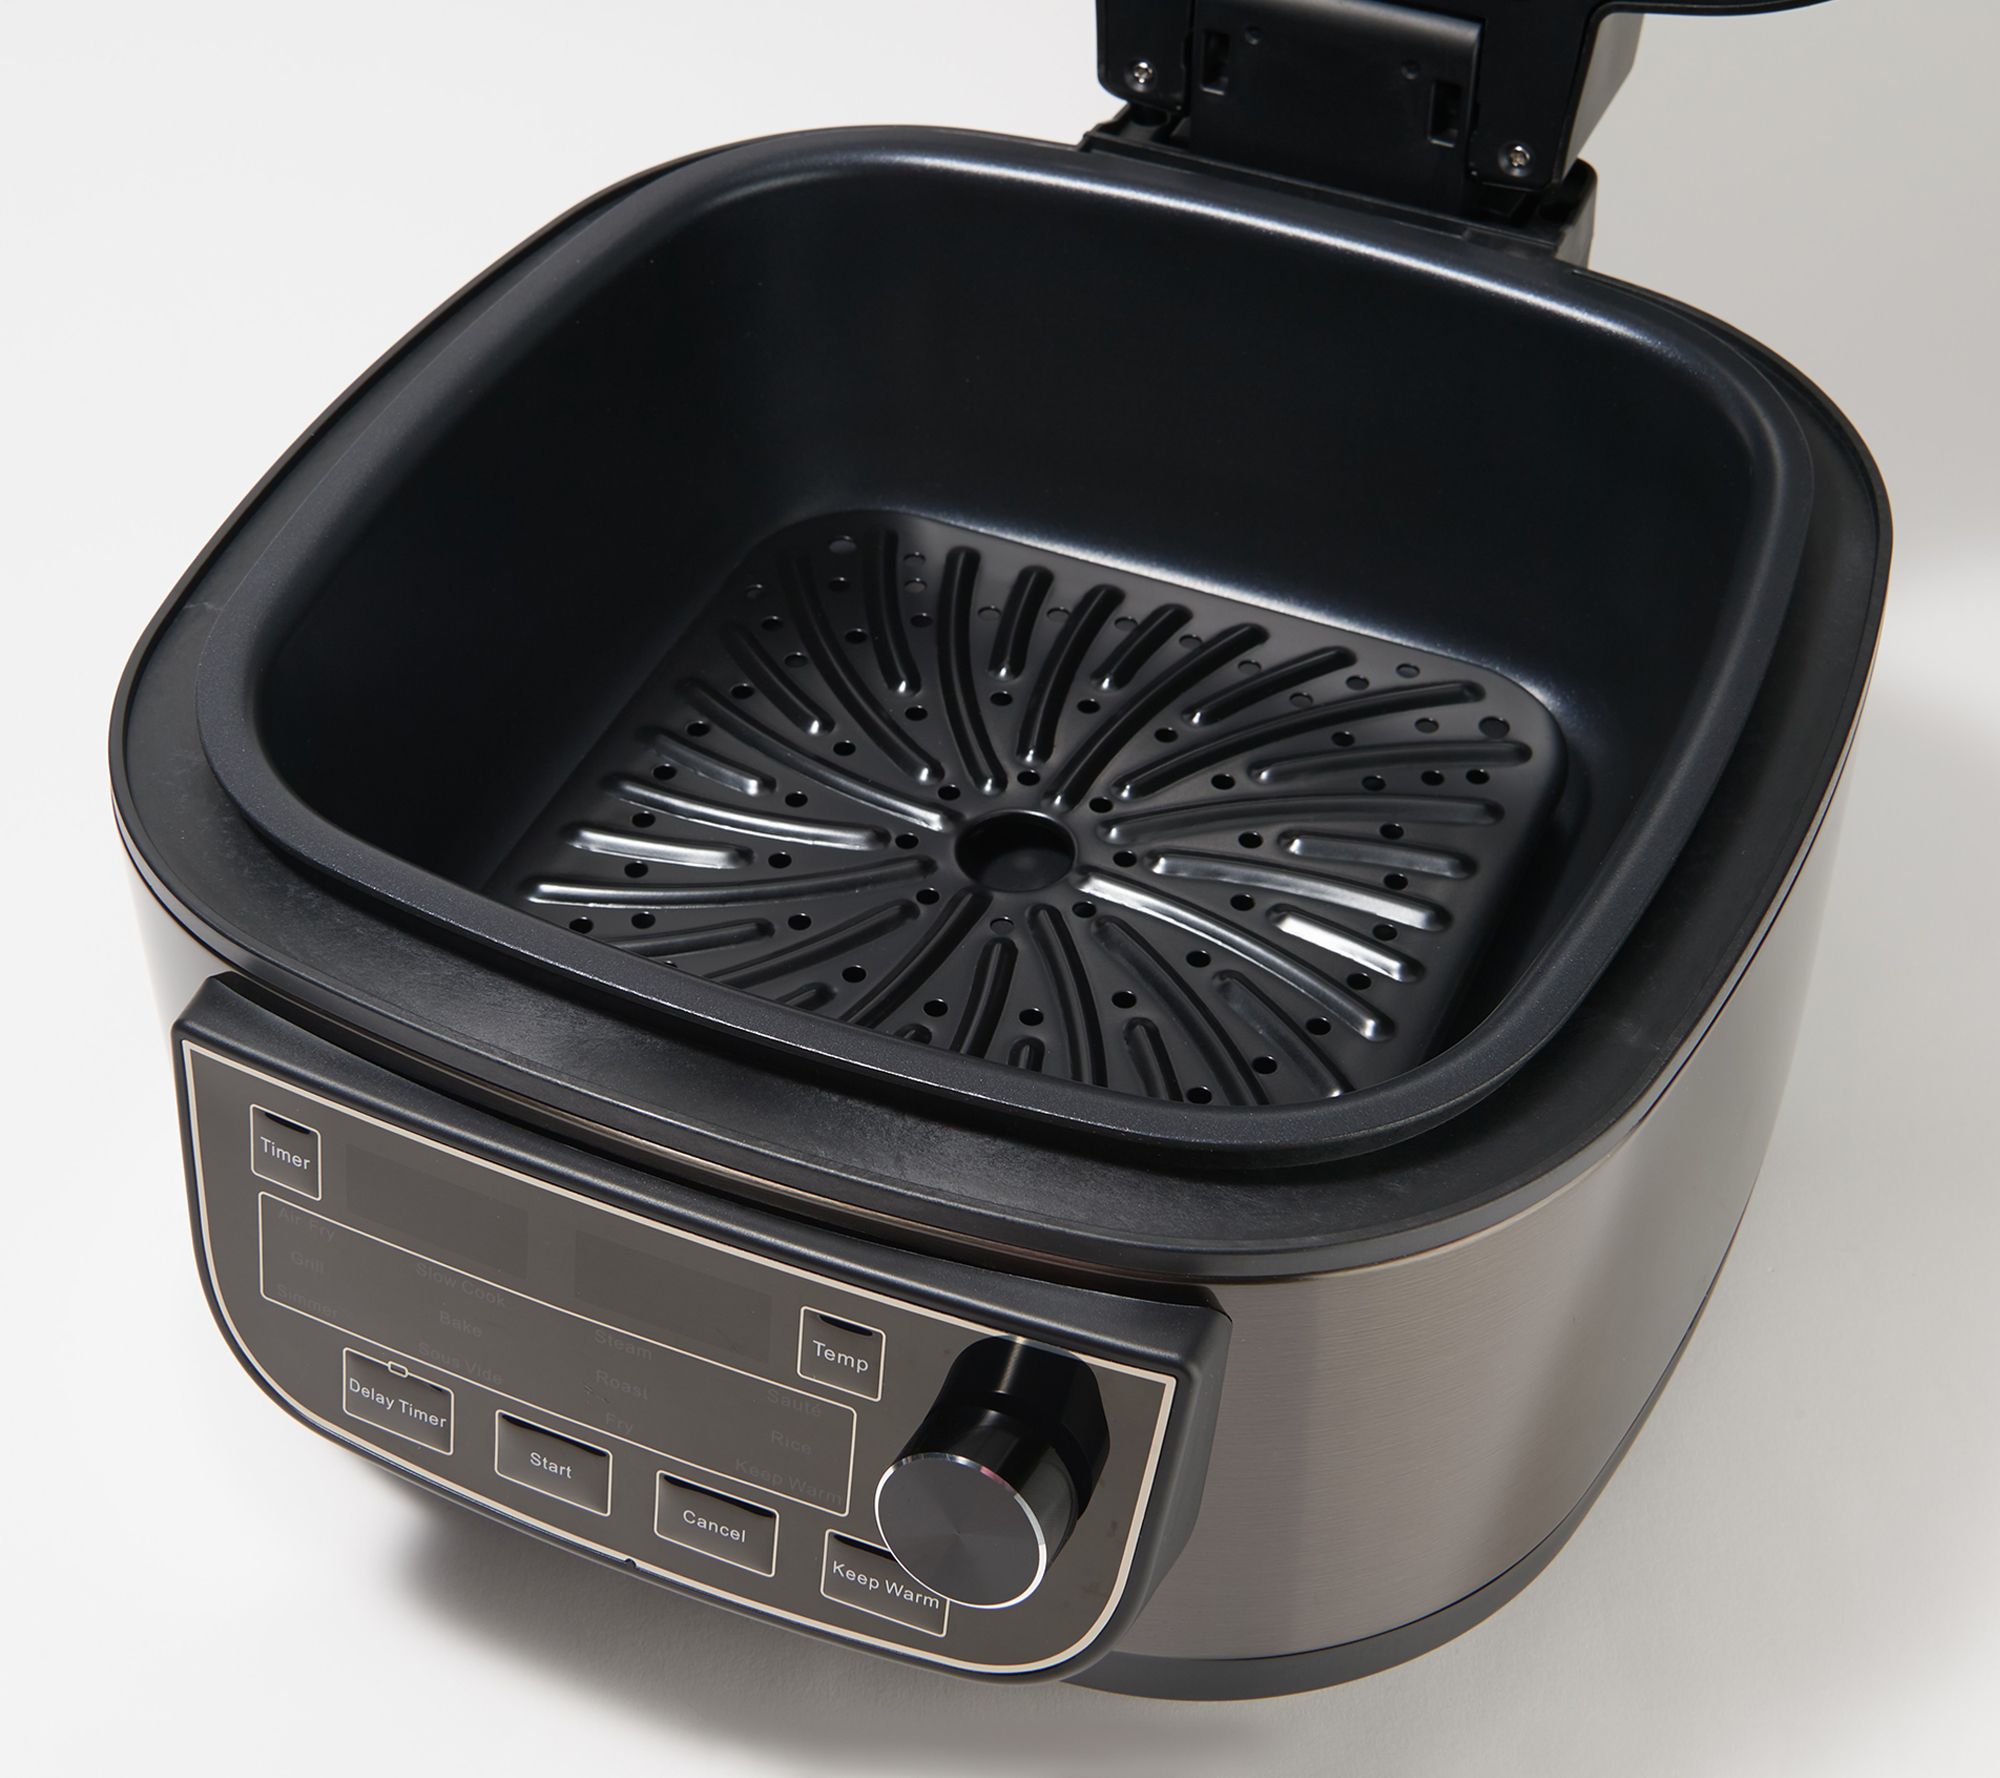 PowerXL 1550W 6-qt 12-in-1 Grill Air Fryer Combo with Glass Lid - QVC.com